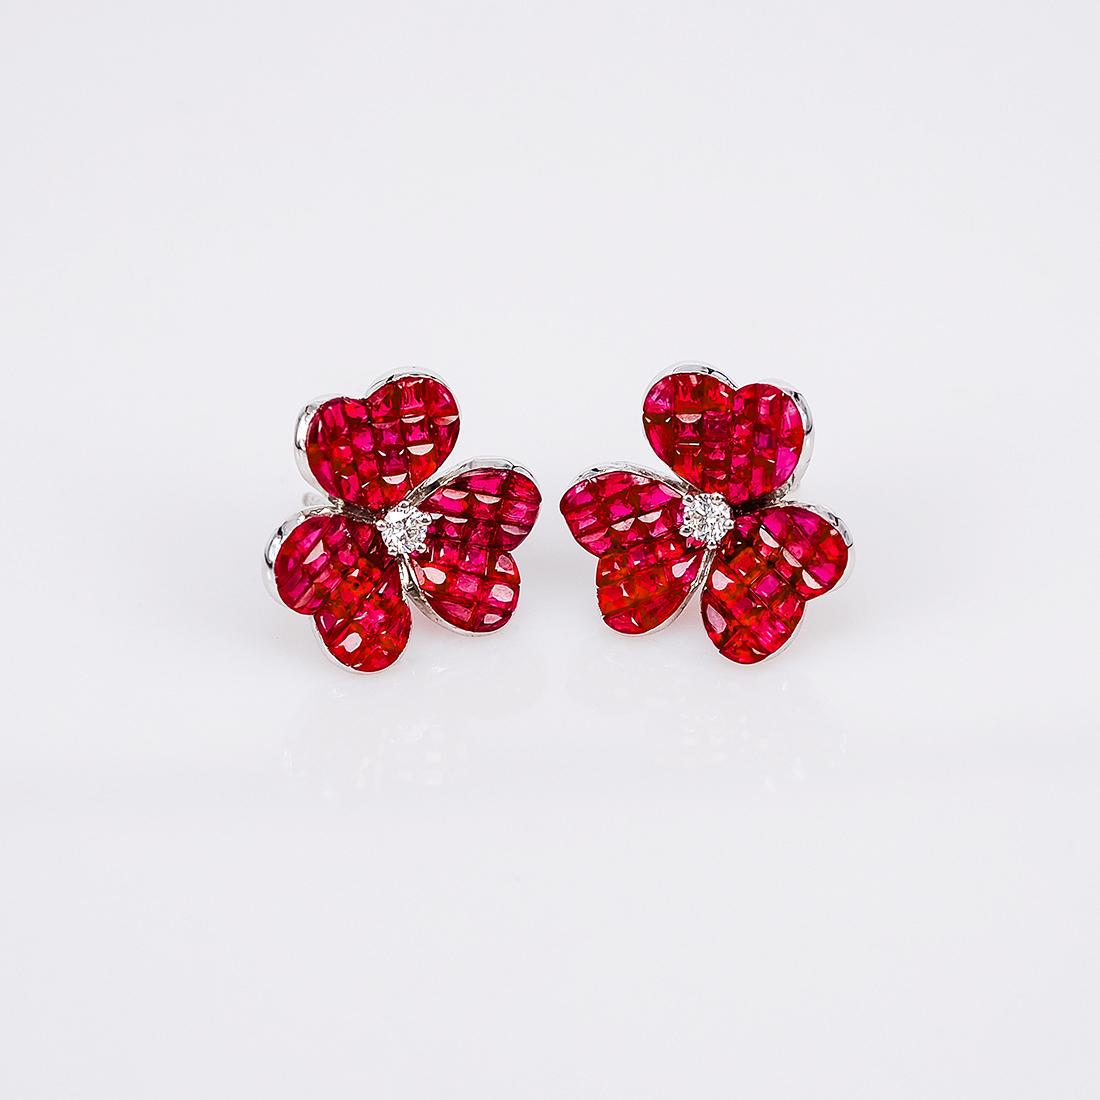 Ruby stud earrings design as classic luxury elegant style. You can use for everyday and also for the evening party. We use the top quality Ruby which make in invisible setting. We set the stone in perfection as we are professional in this kind of